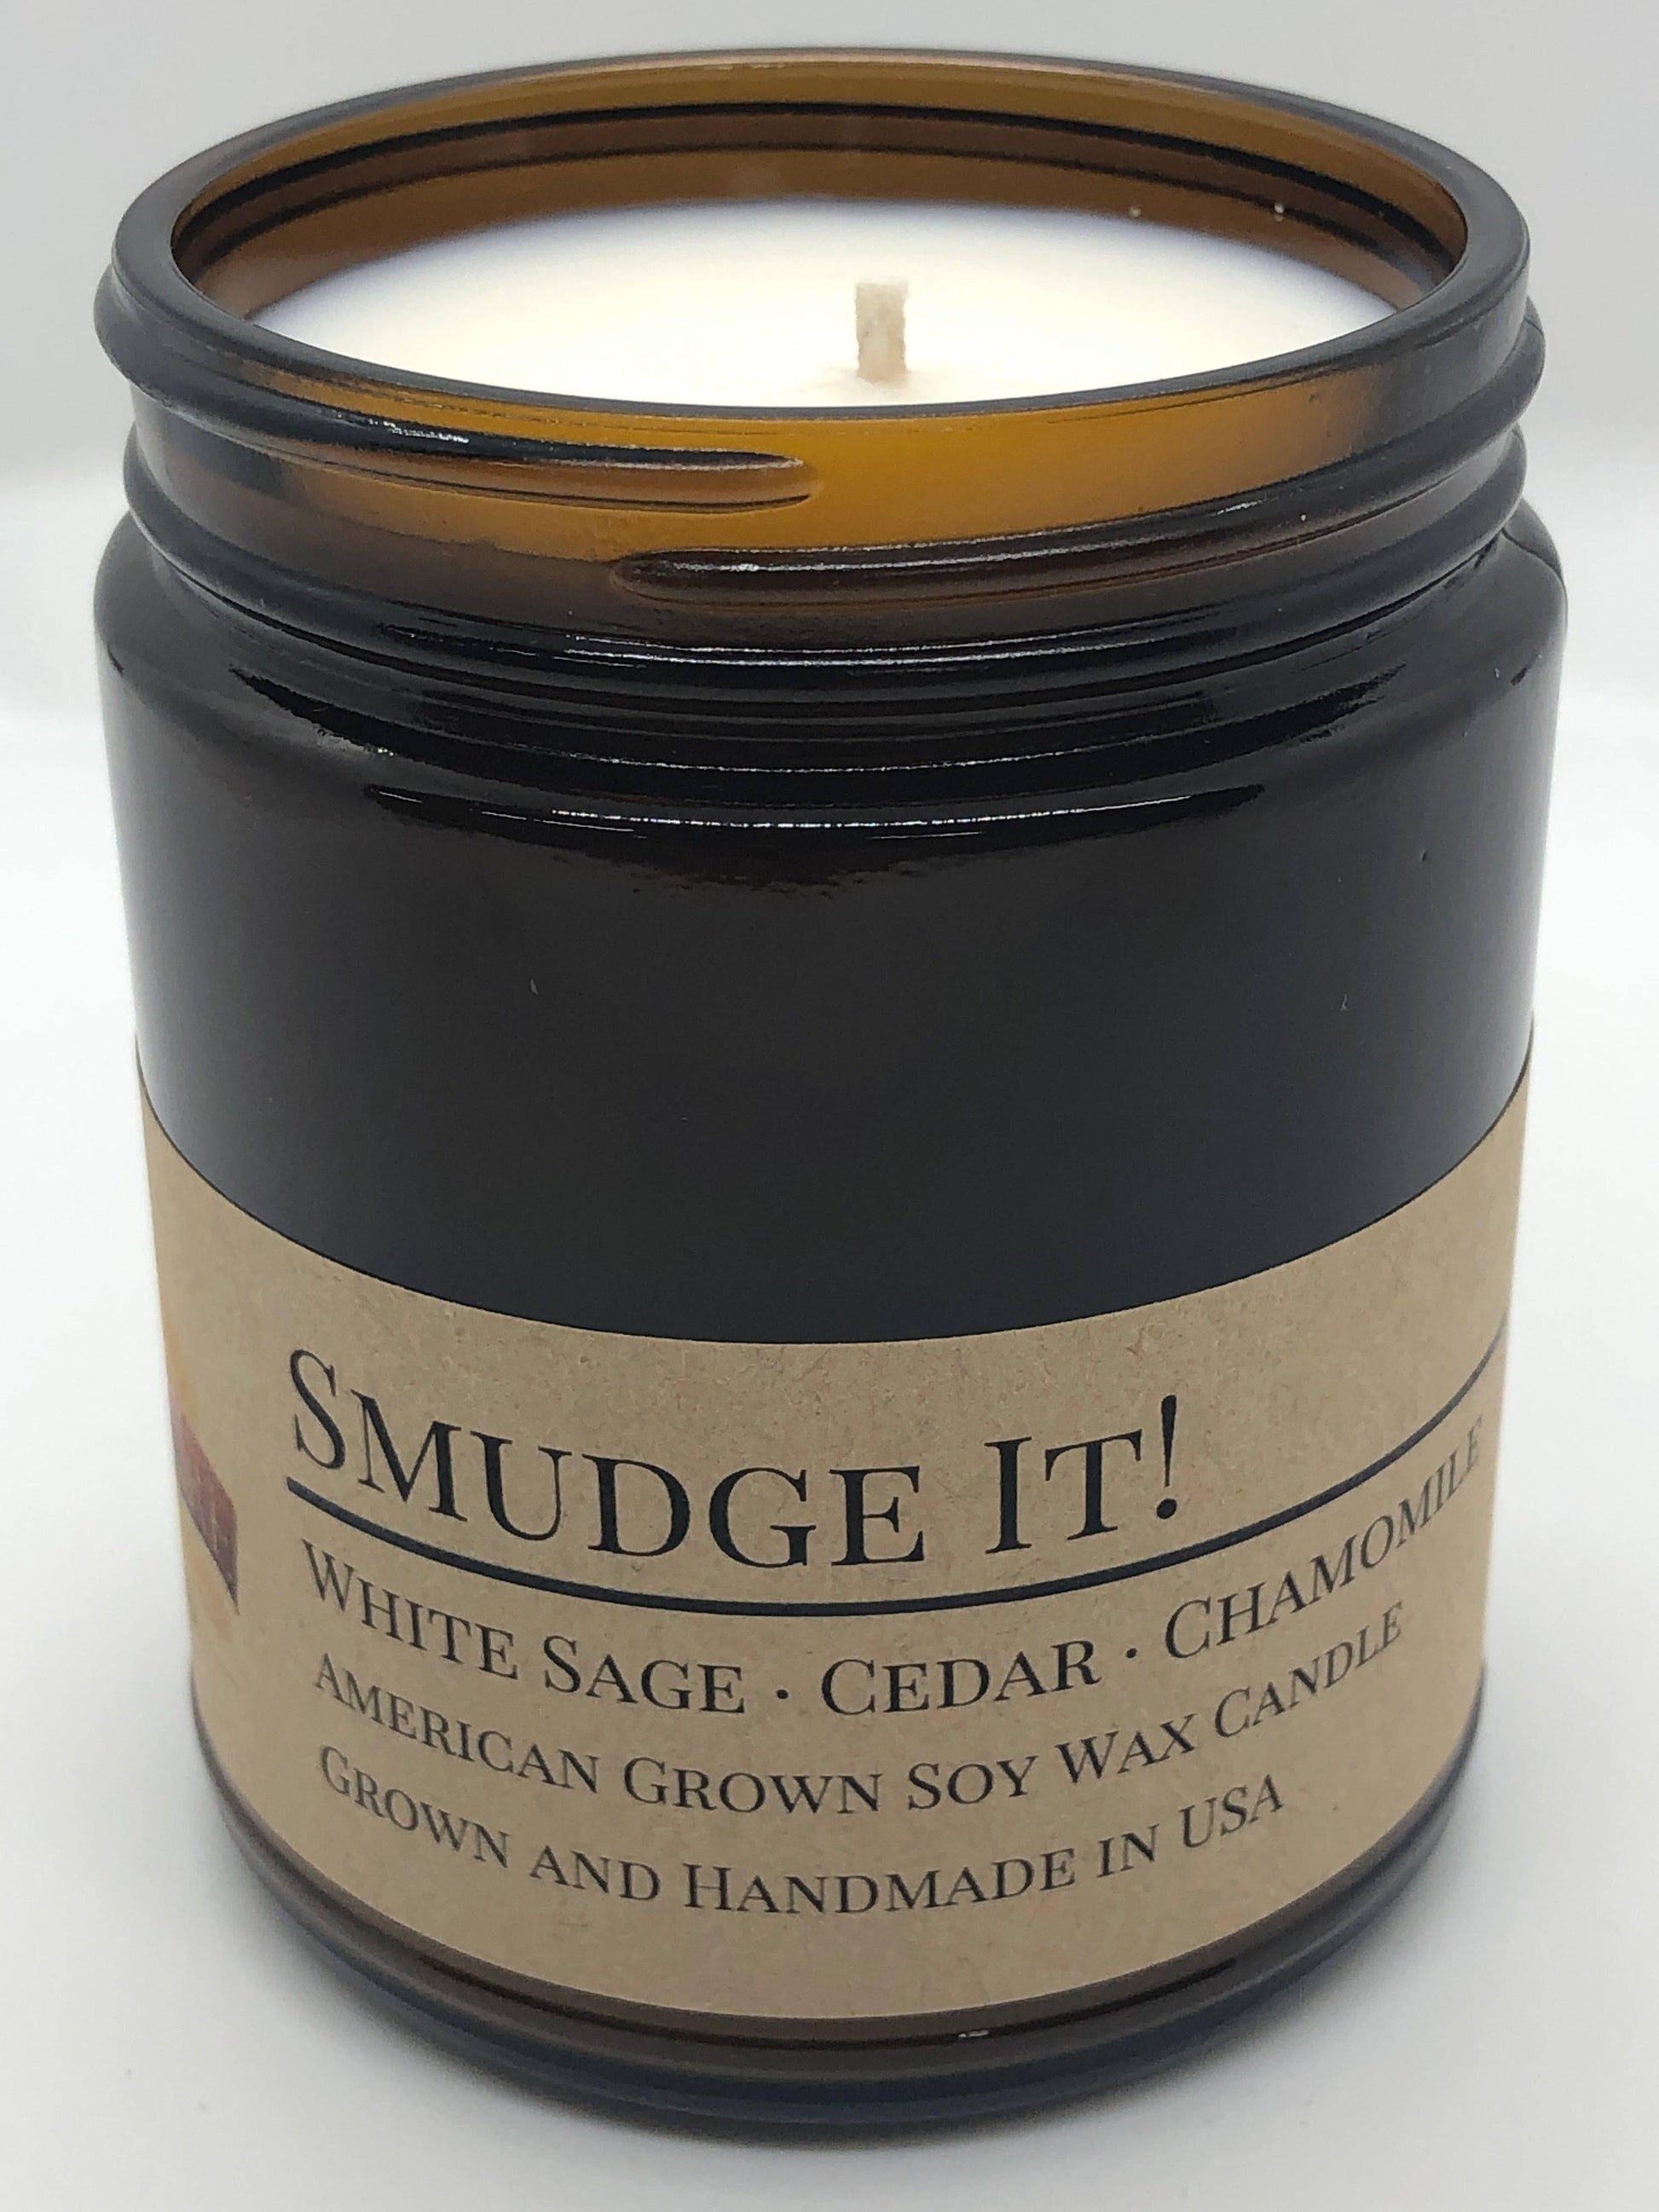 Smudge It! Soy Wax Candle | 9 oz Amber Apothecary Jar - Prairie Fire Candles